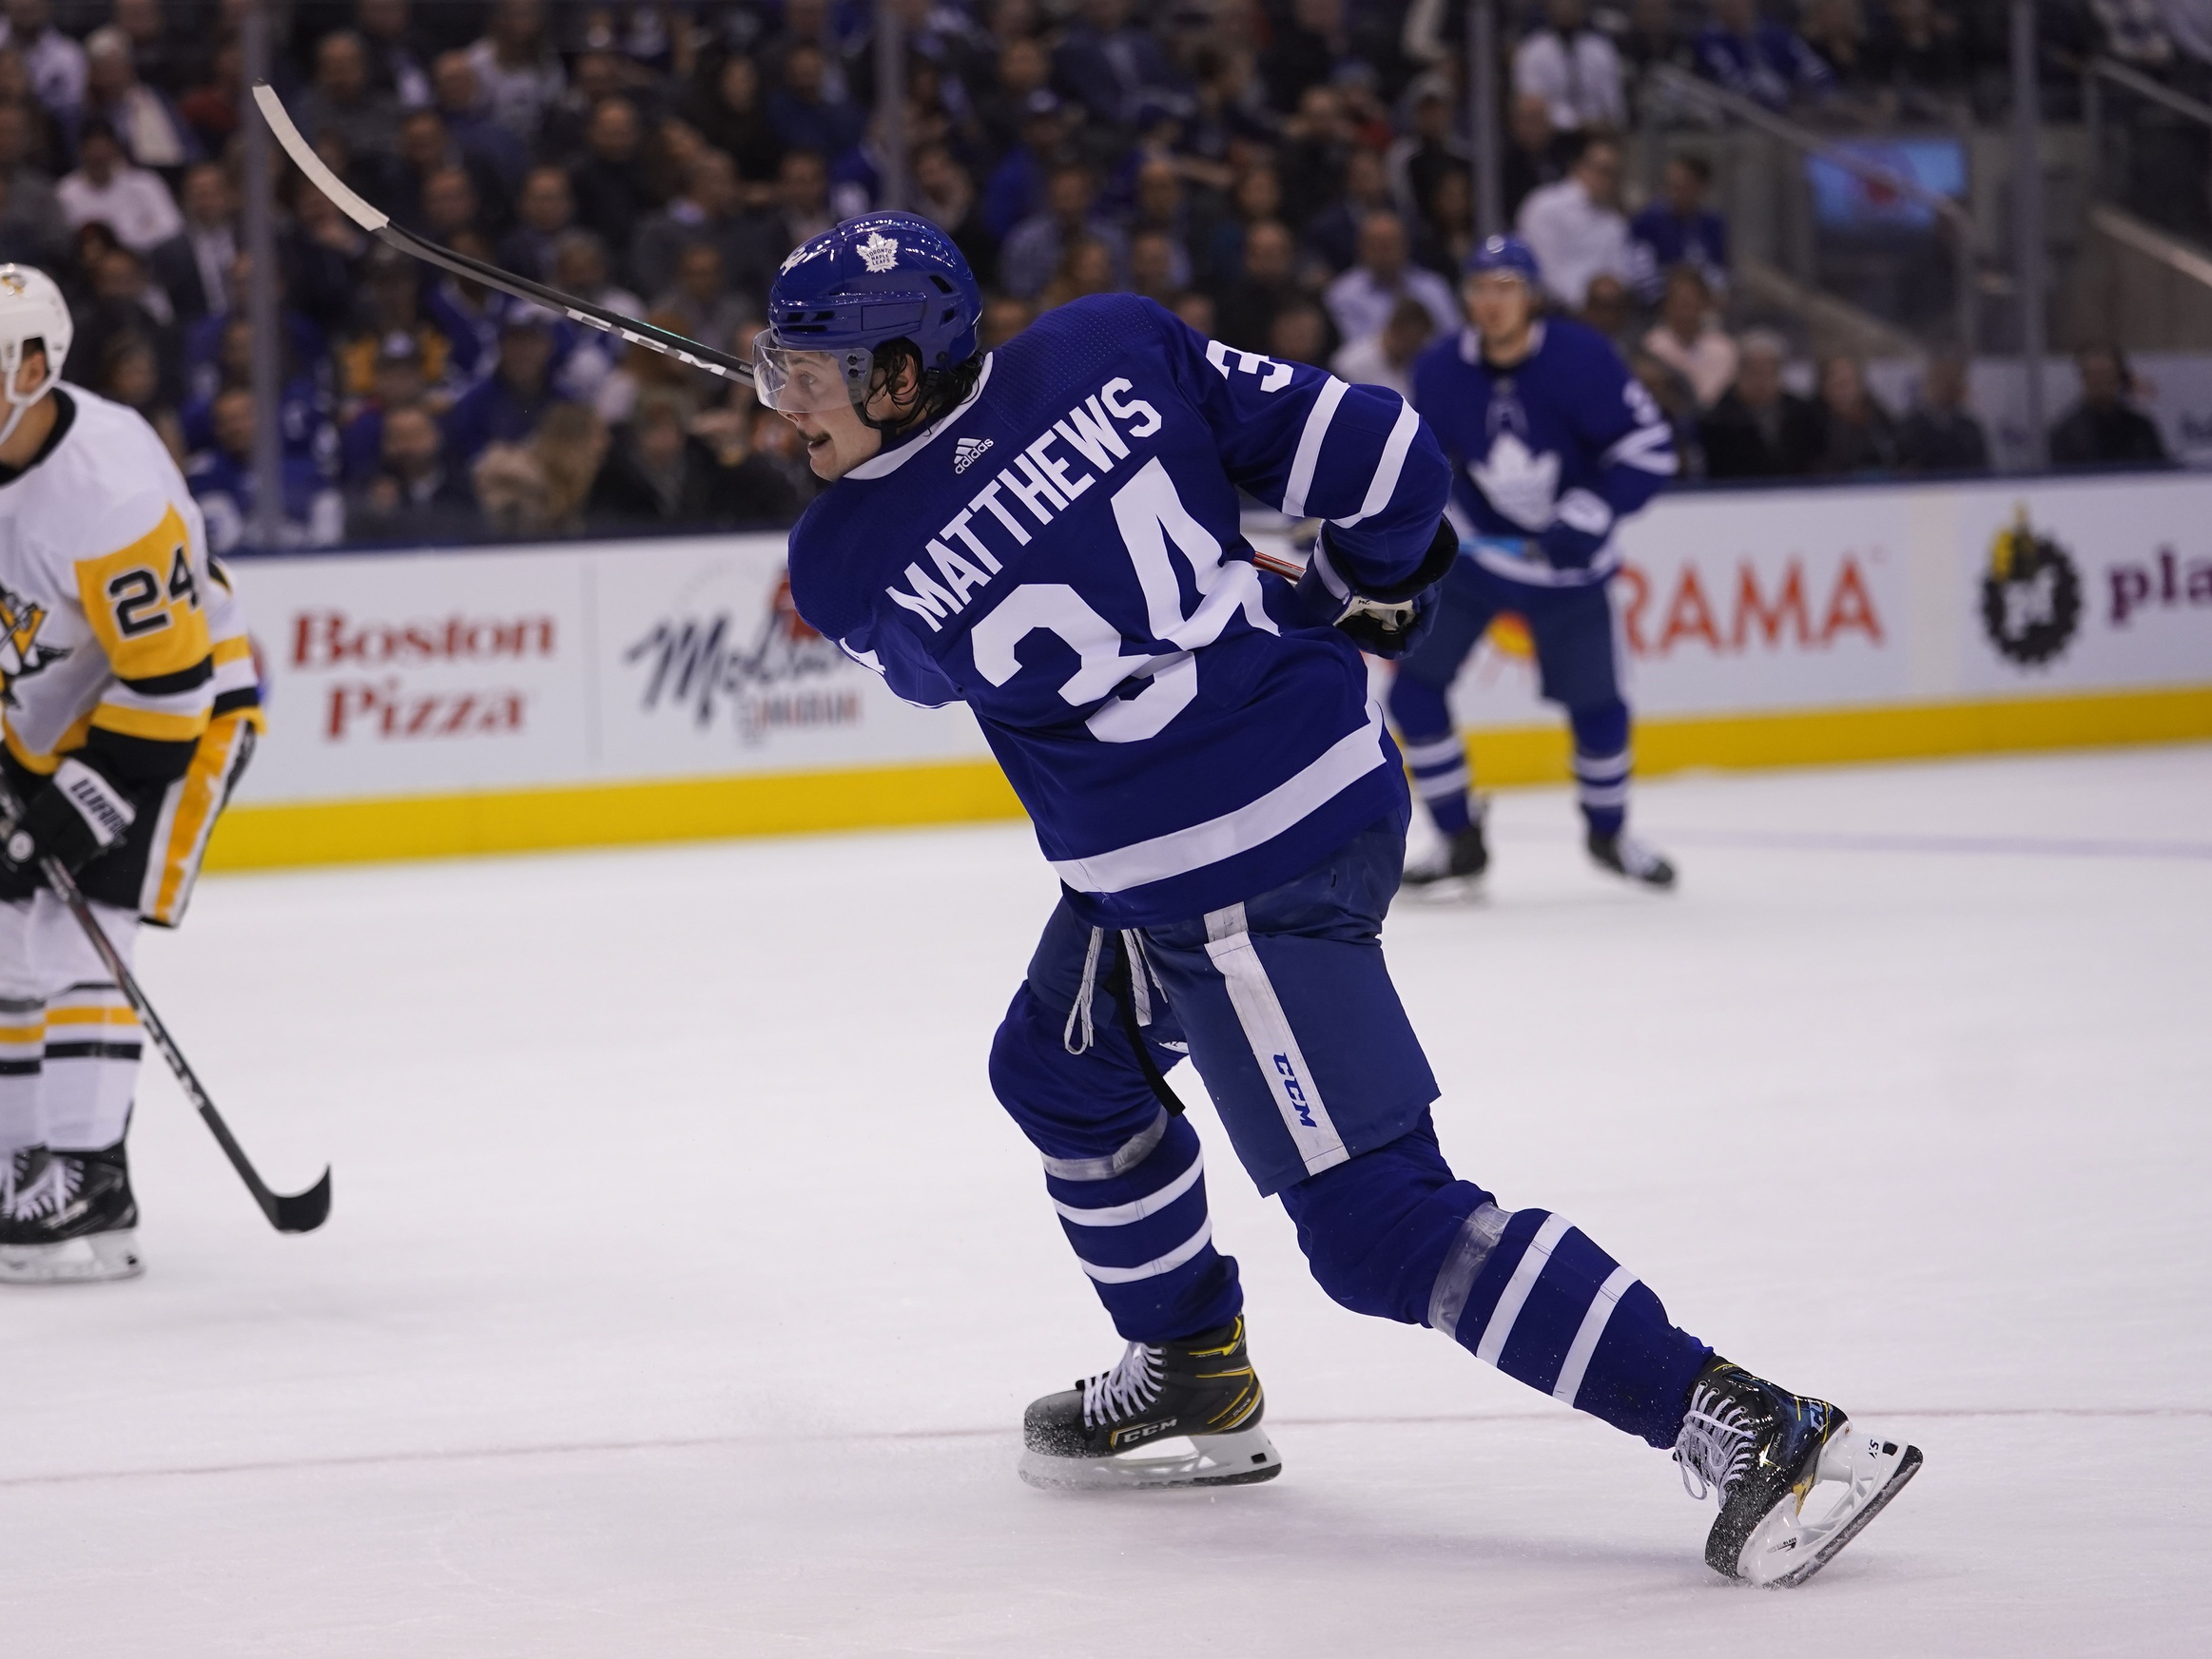 Maple Leafs star Auston Matthews tests positive for COVID-19